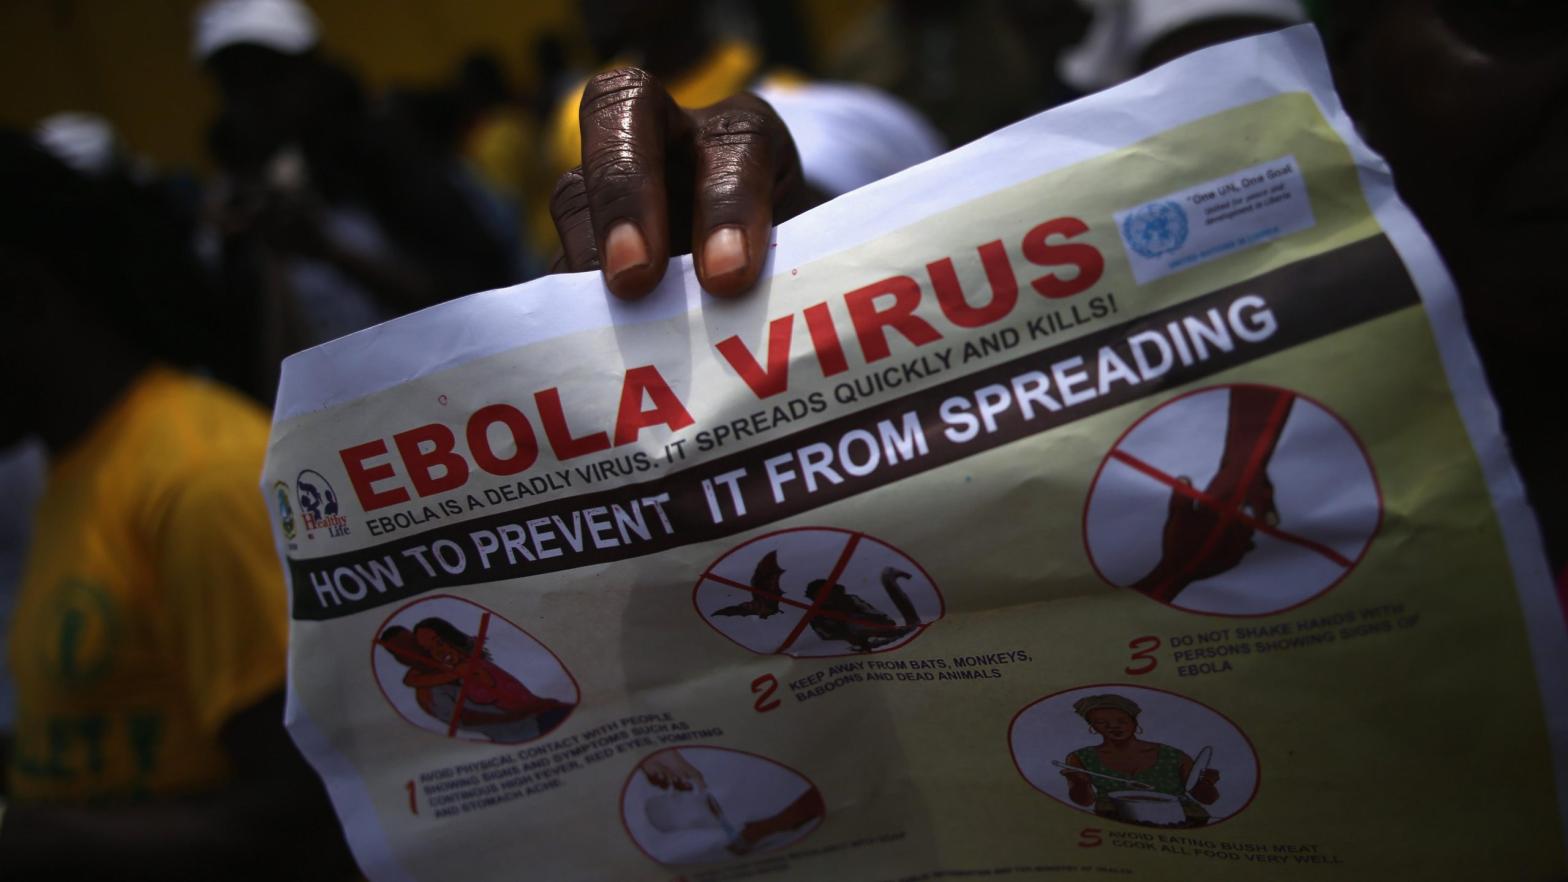 Public health advocates stage an Ebola awareness and prevention event on August 18, 2014 in Monrovia, Liberia, during the height of the deadliest outbreak to date in West Africa between 2013 and 2016.  (Photo: John Moore, Getty Images)